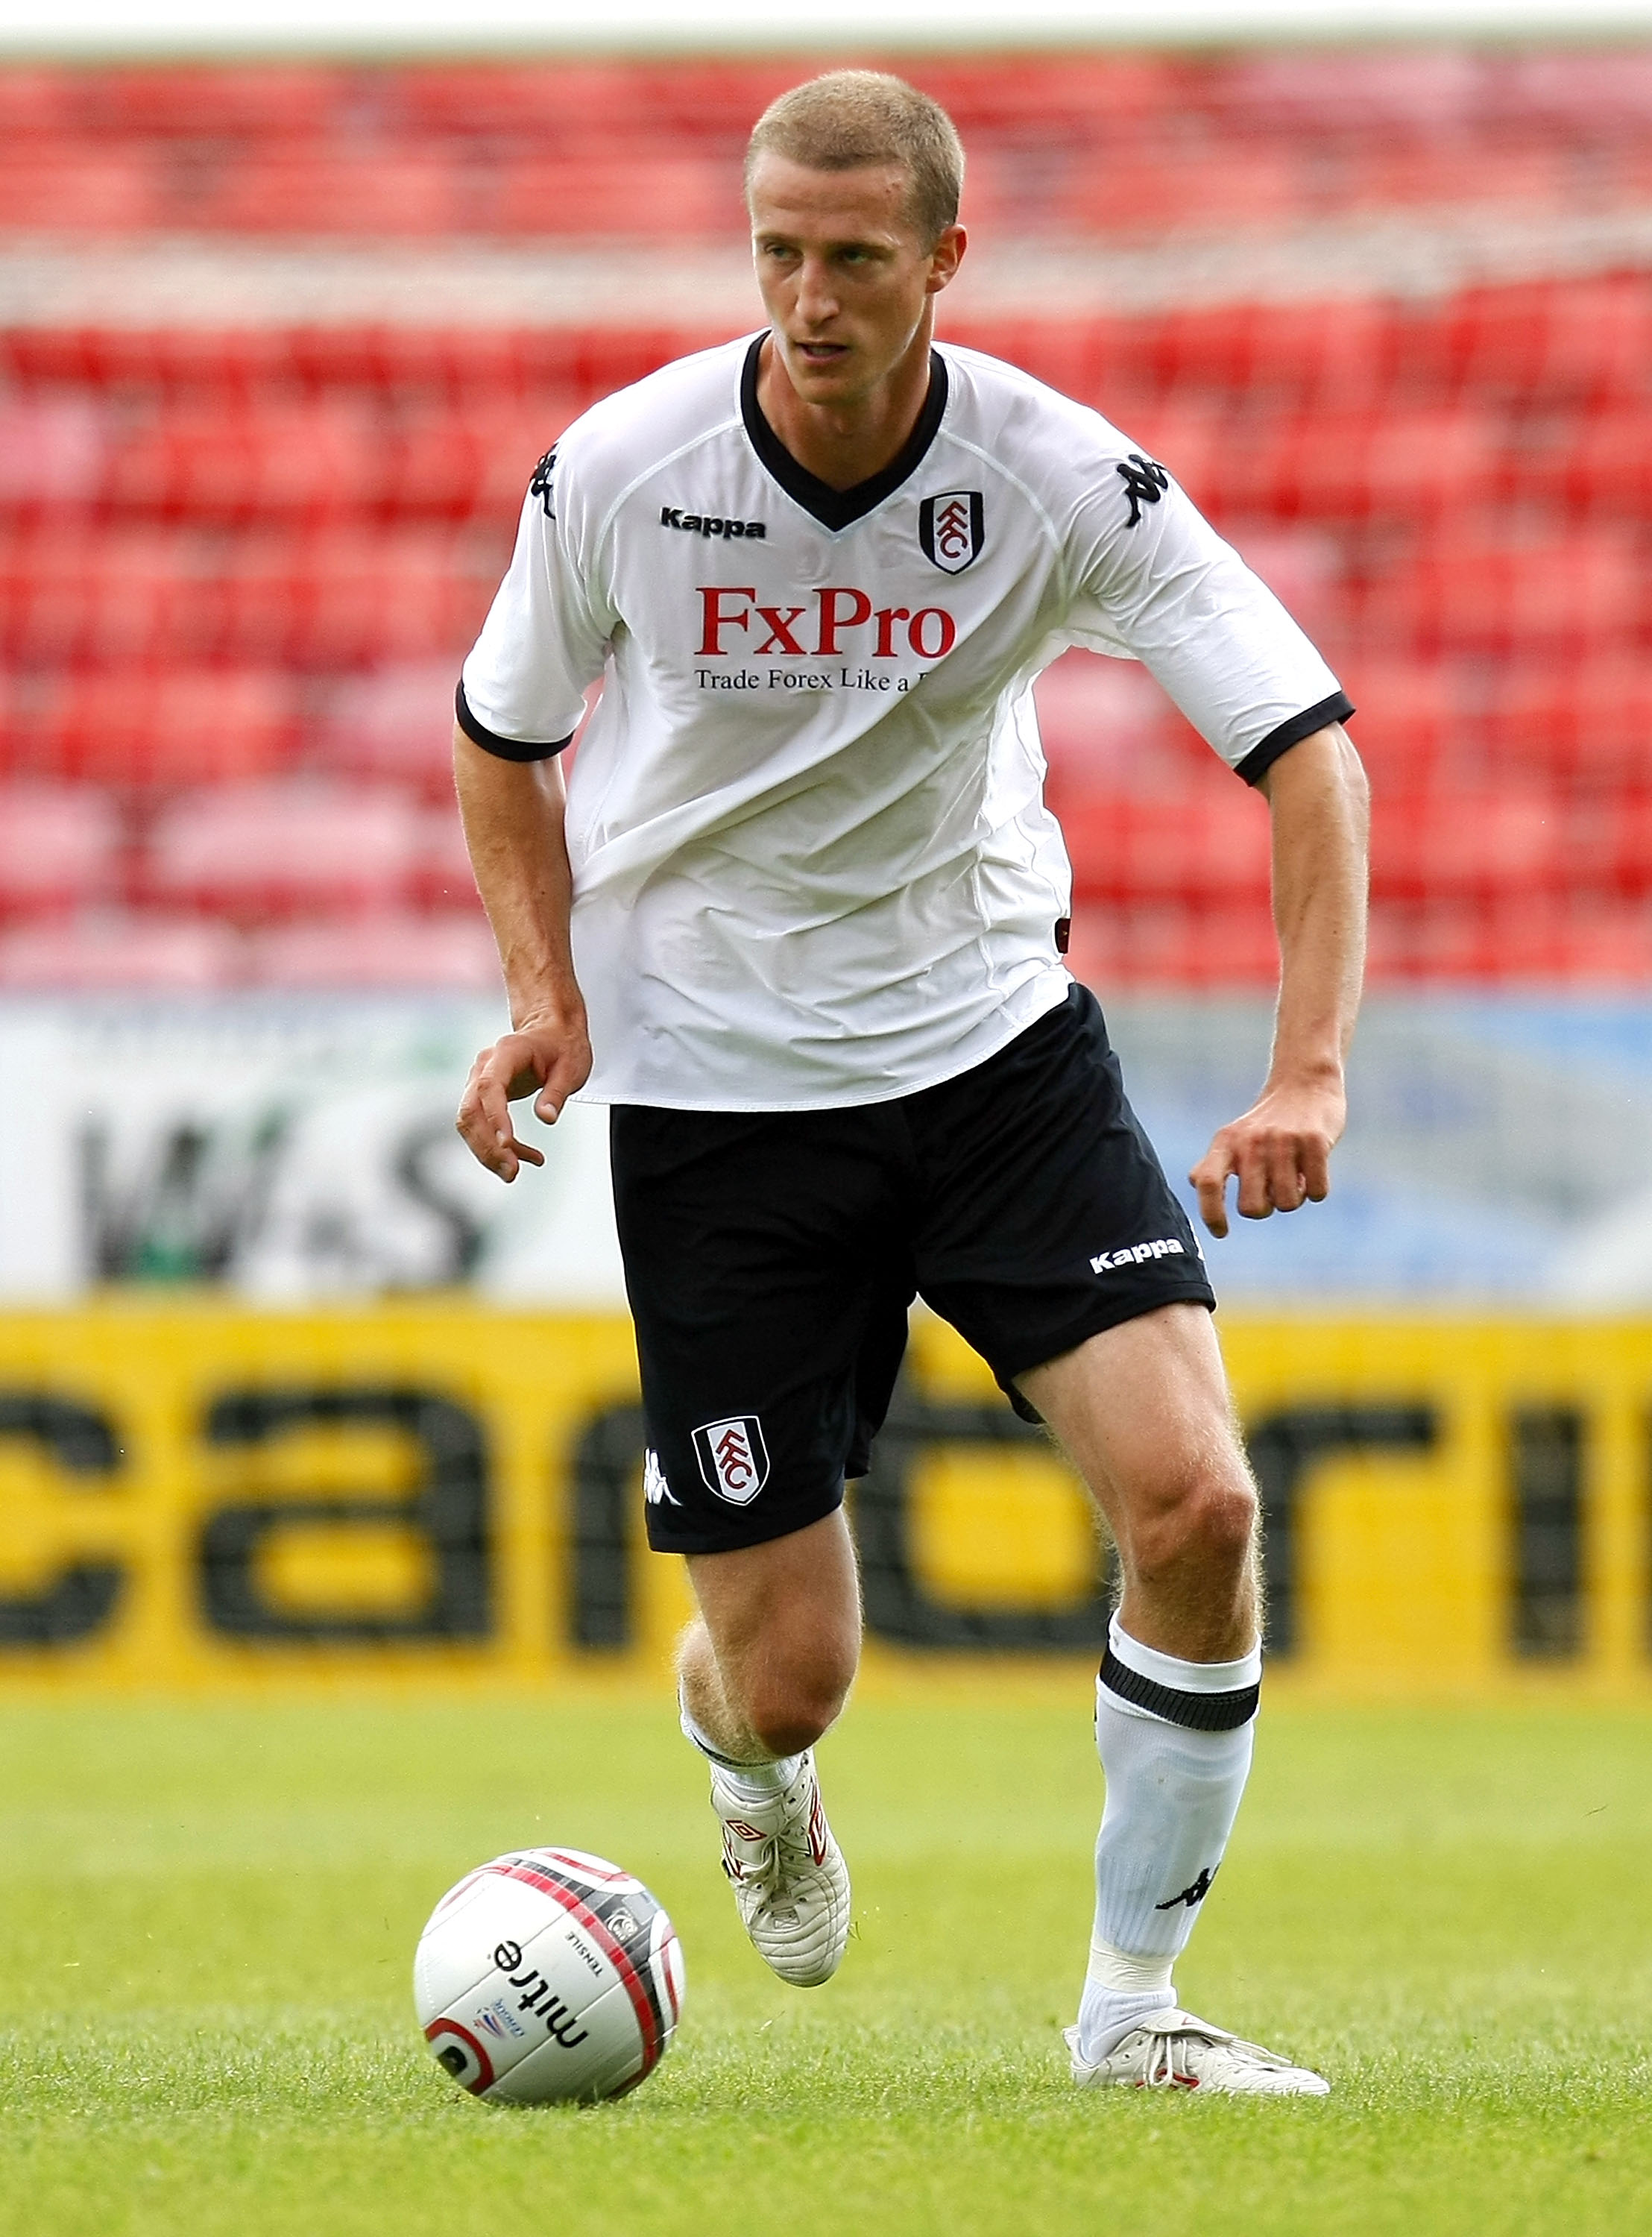 BOURNEMOUTH, ENGLAND - JULY 17: Brede Hangeland of Fulham in action during the pre season friendly match between AFC Bournemouth and Fulham at the Fitness First Stadium on July 17, 2010 in Bournemouth, England. (Photo by Tom Dulat/Getty Images)